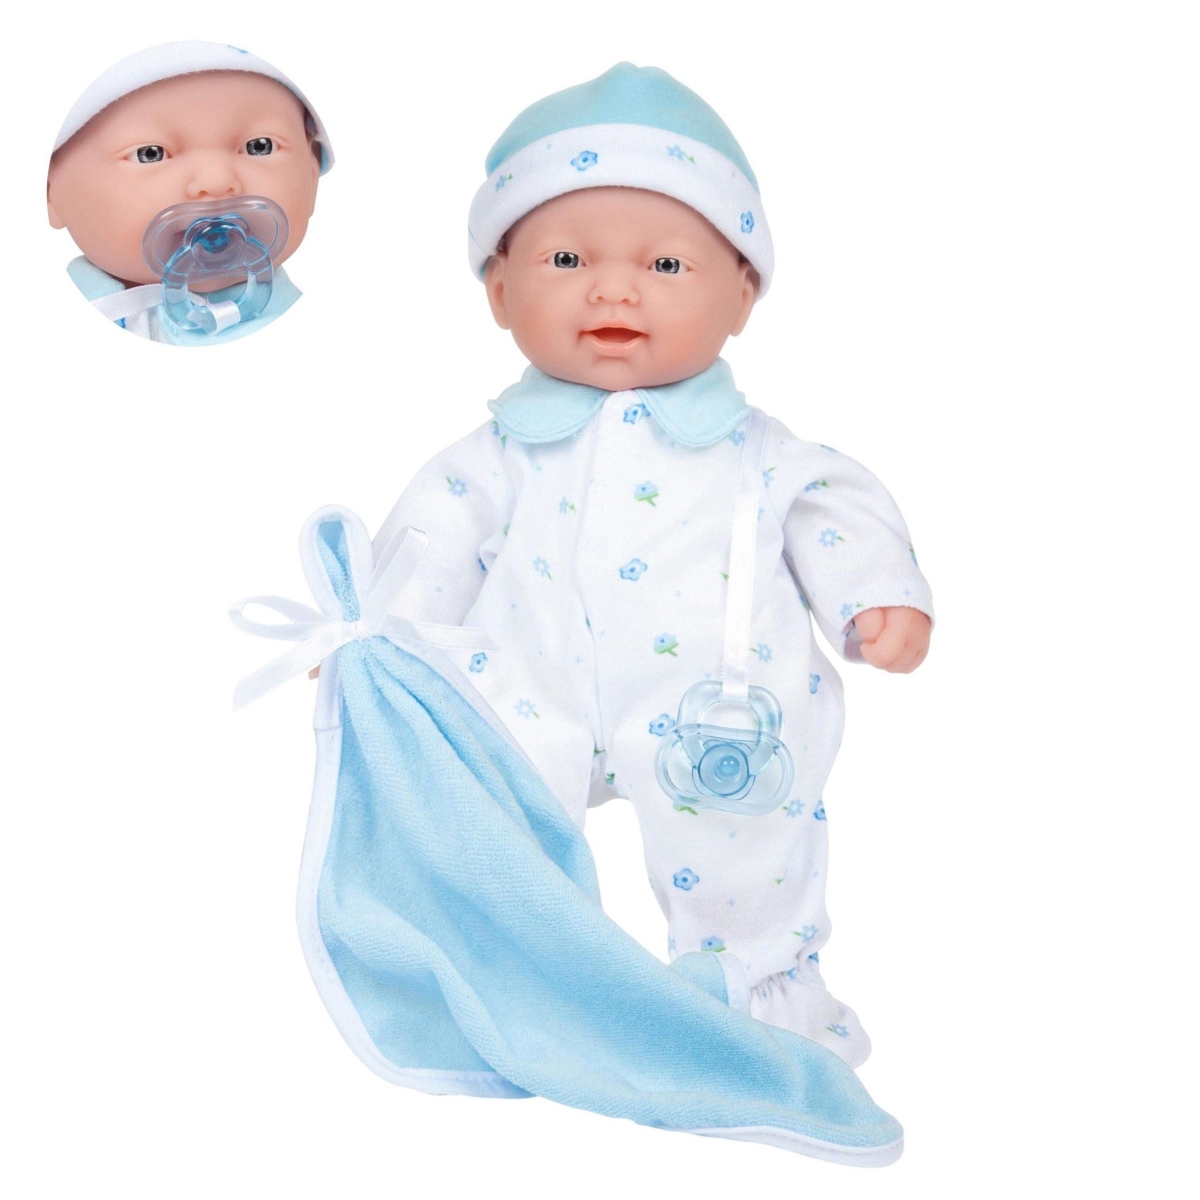 Picture of La Baby 11 in. Soft Body Baby Doll with Realistic Features in Blue